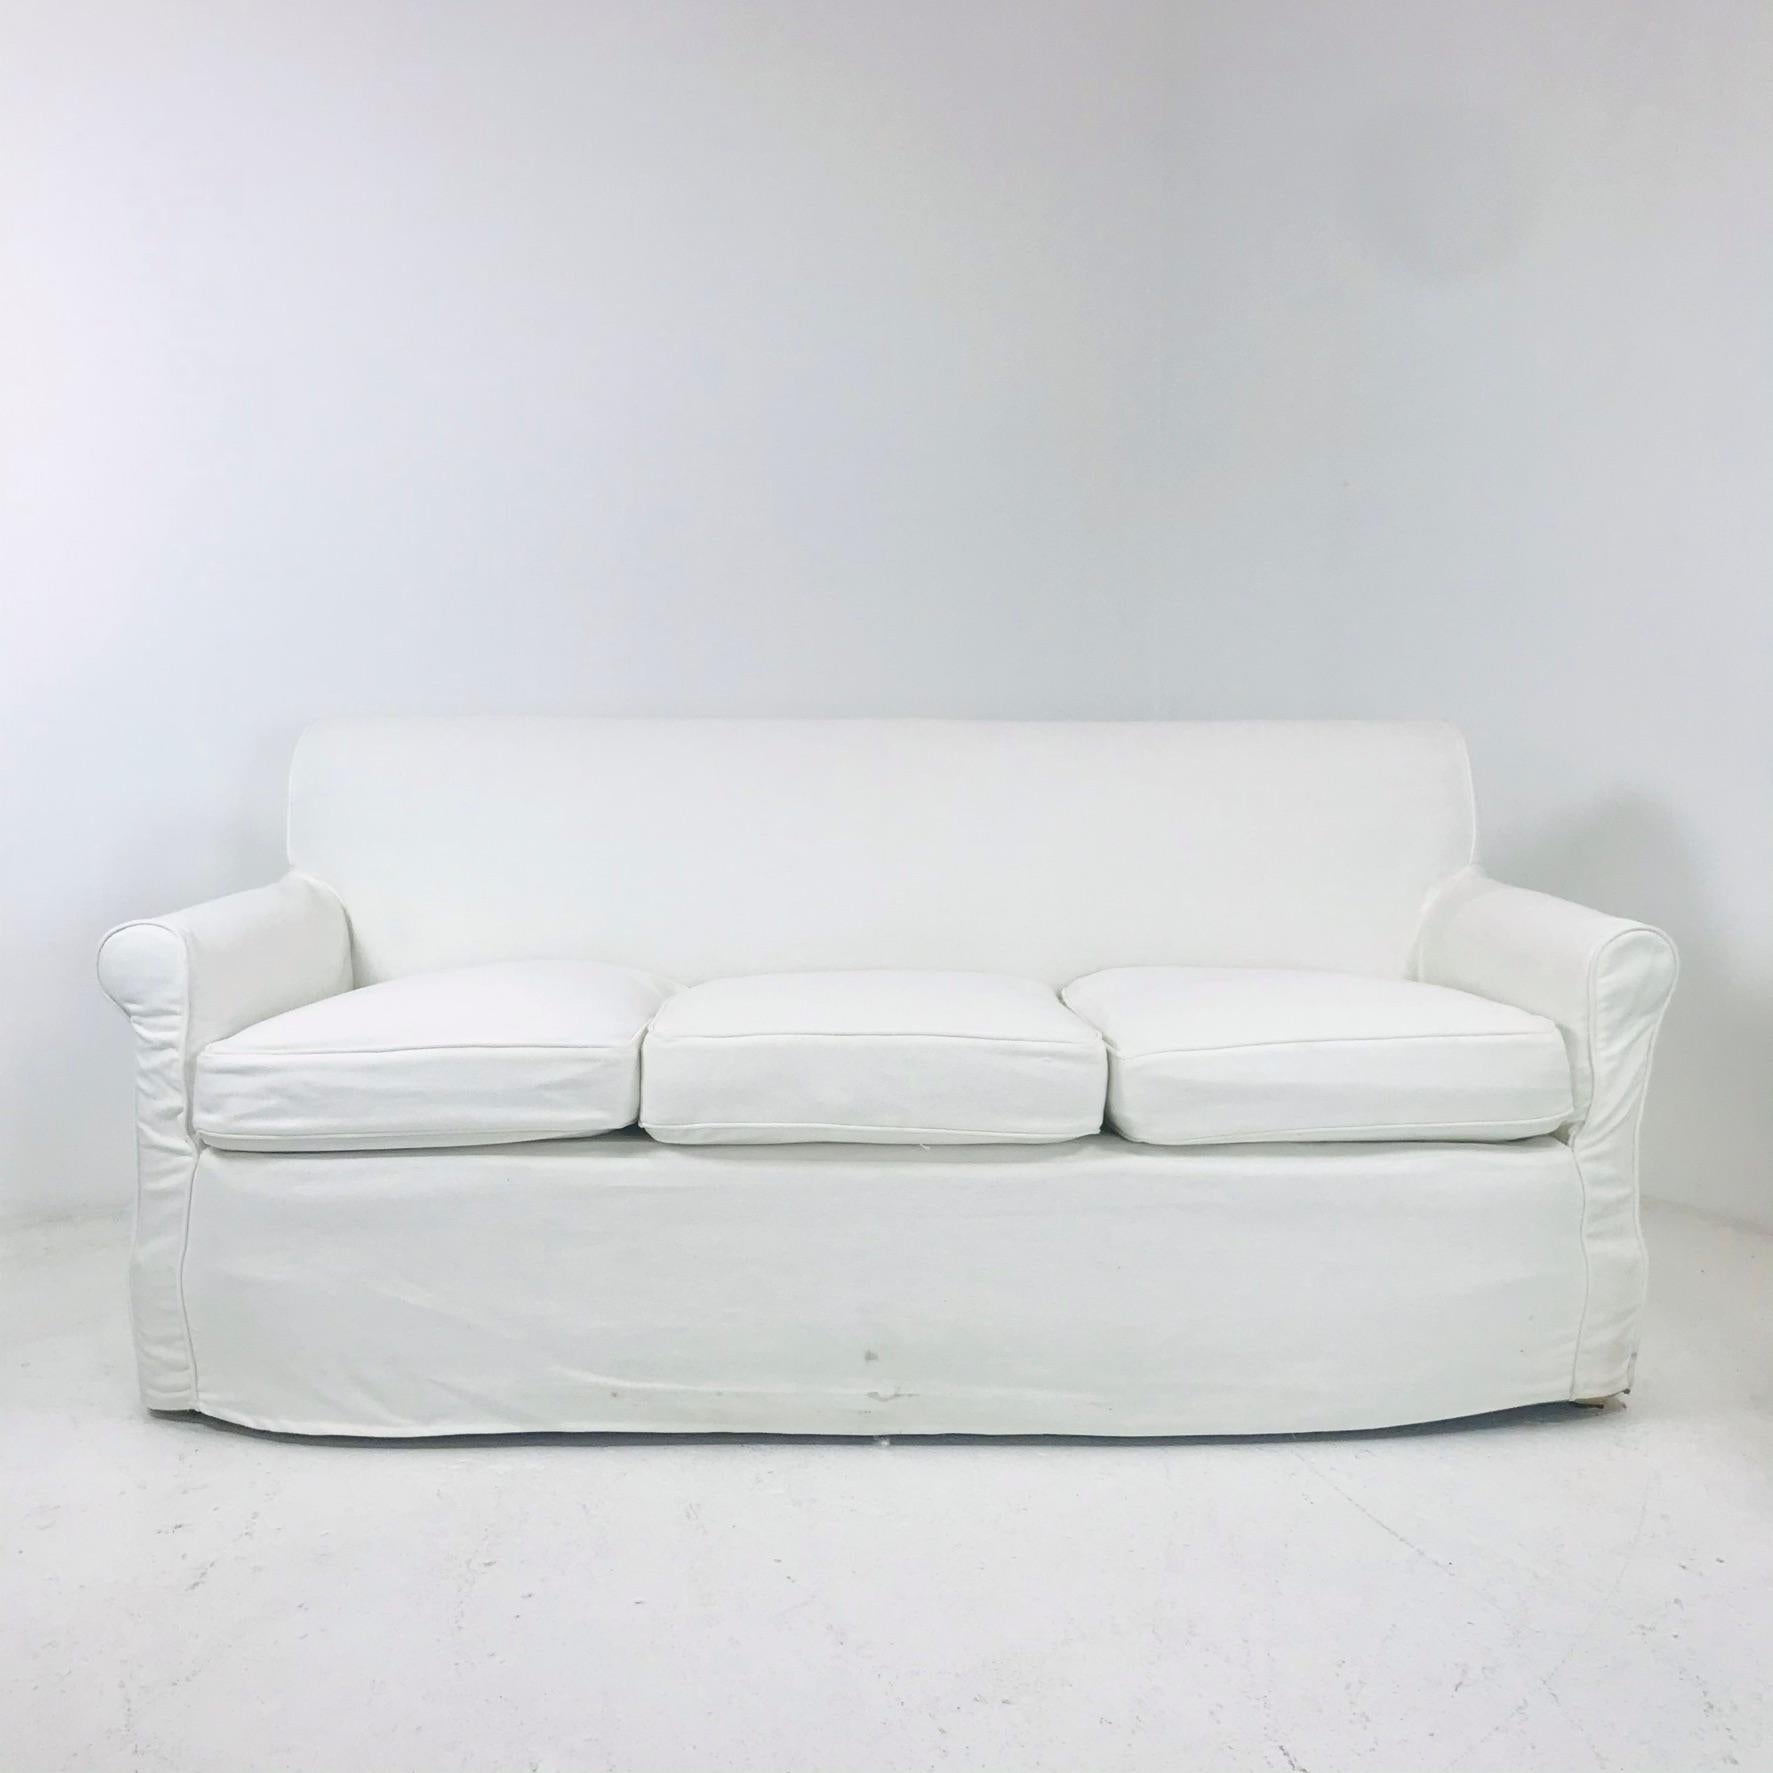 Remarkable 68” three pillow sofas, manufactured by De Angelis & chosen by Billy Baldwin in 1960 for Centre Island, Oyster Bay residence. The sofas are covered in a Chenille fabric, 69” W x 34” D x 32” H. Includes custom white slipcovers, and